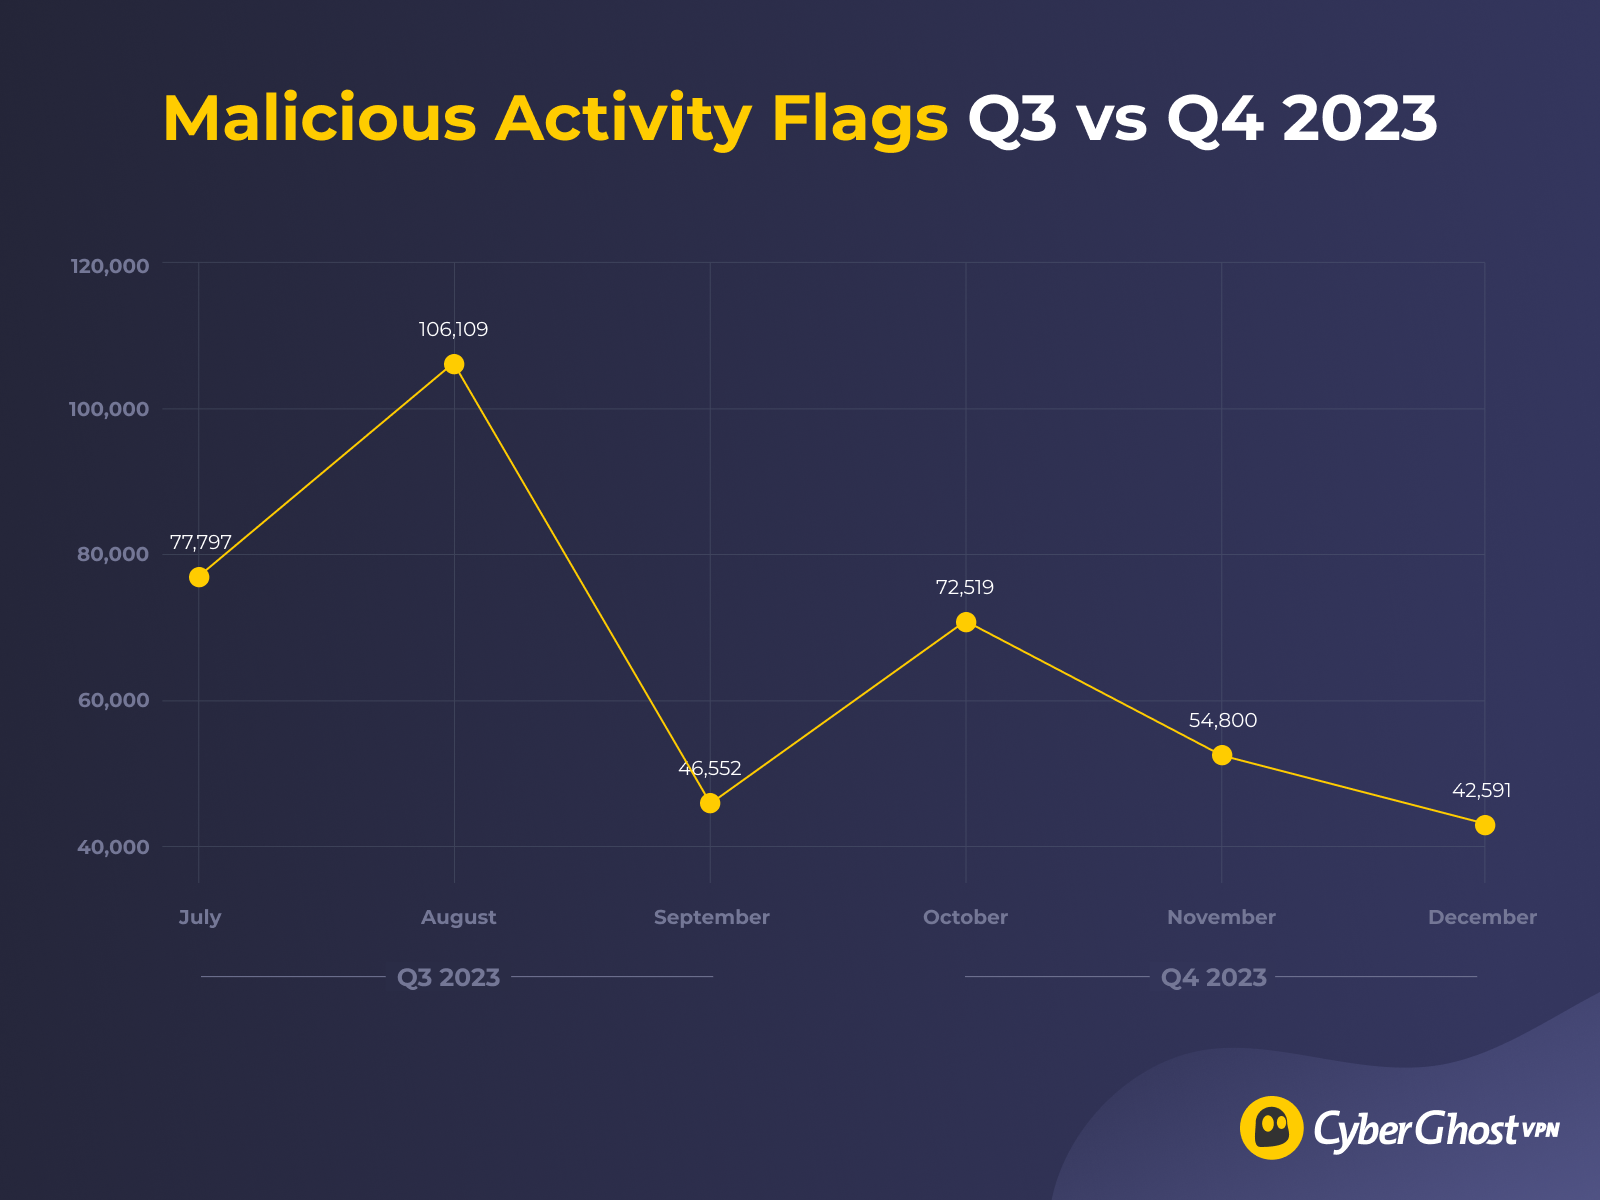 CyberGhost VPN's Quarterly Transparency Report numbers for Malicious Activity Flags Q4 2023